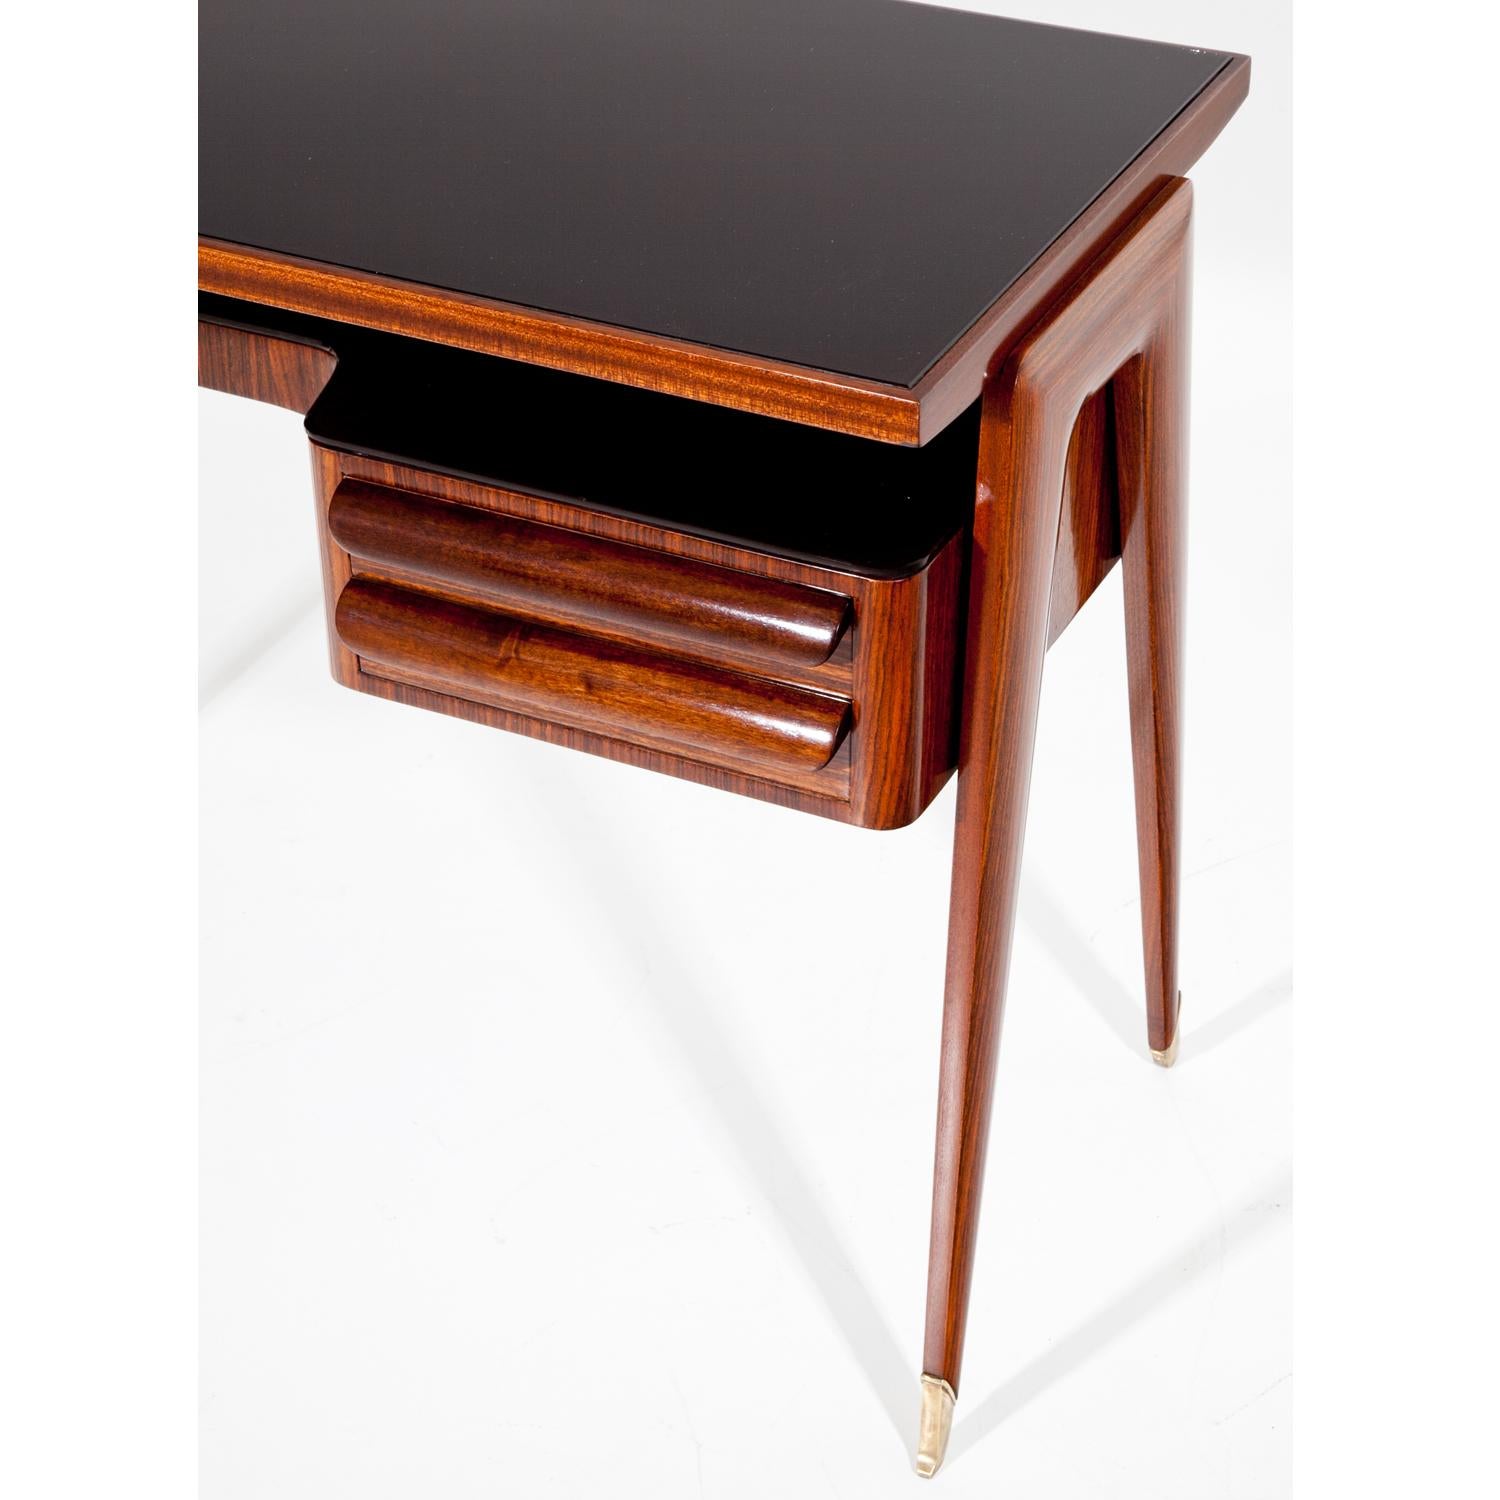 1950s Italian desk by Vittorio Dassi on elegant legs with brass sabots, two drawers to the right and a writing surface with glass top.